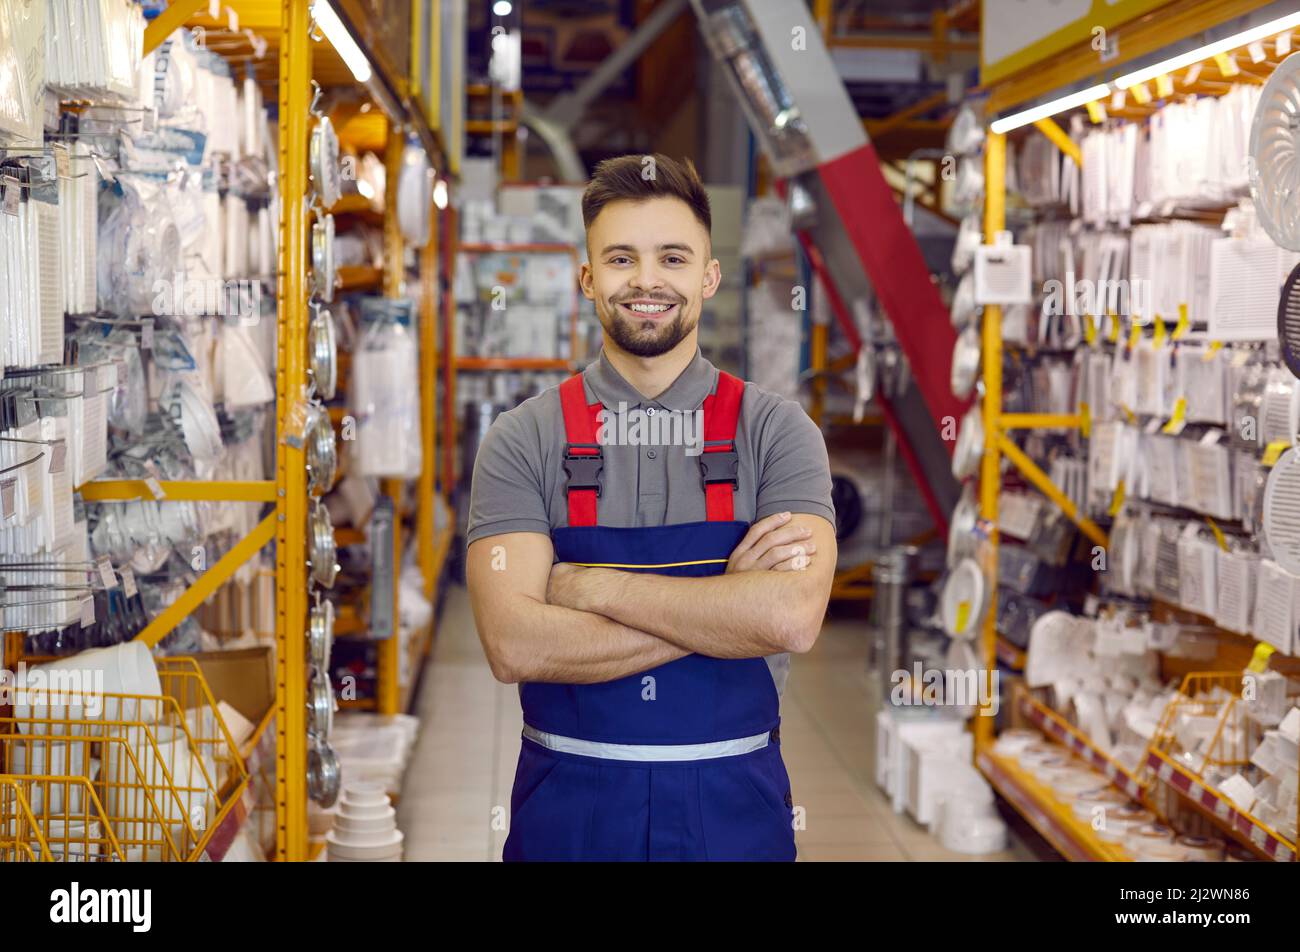 Salesman in uniform at hardware store. Man standing next to shelves with tools, smiling Stock Photo